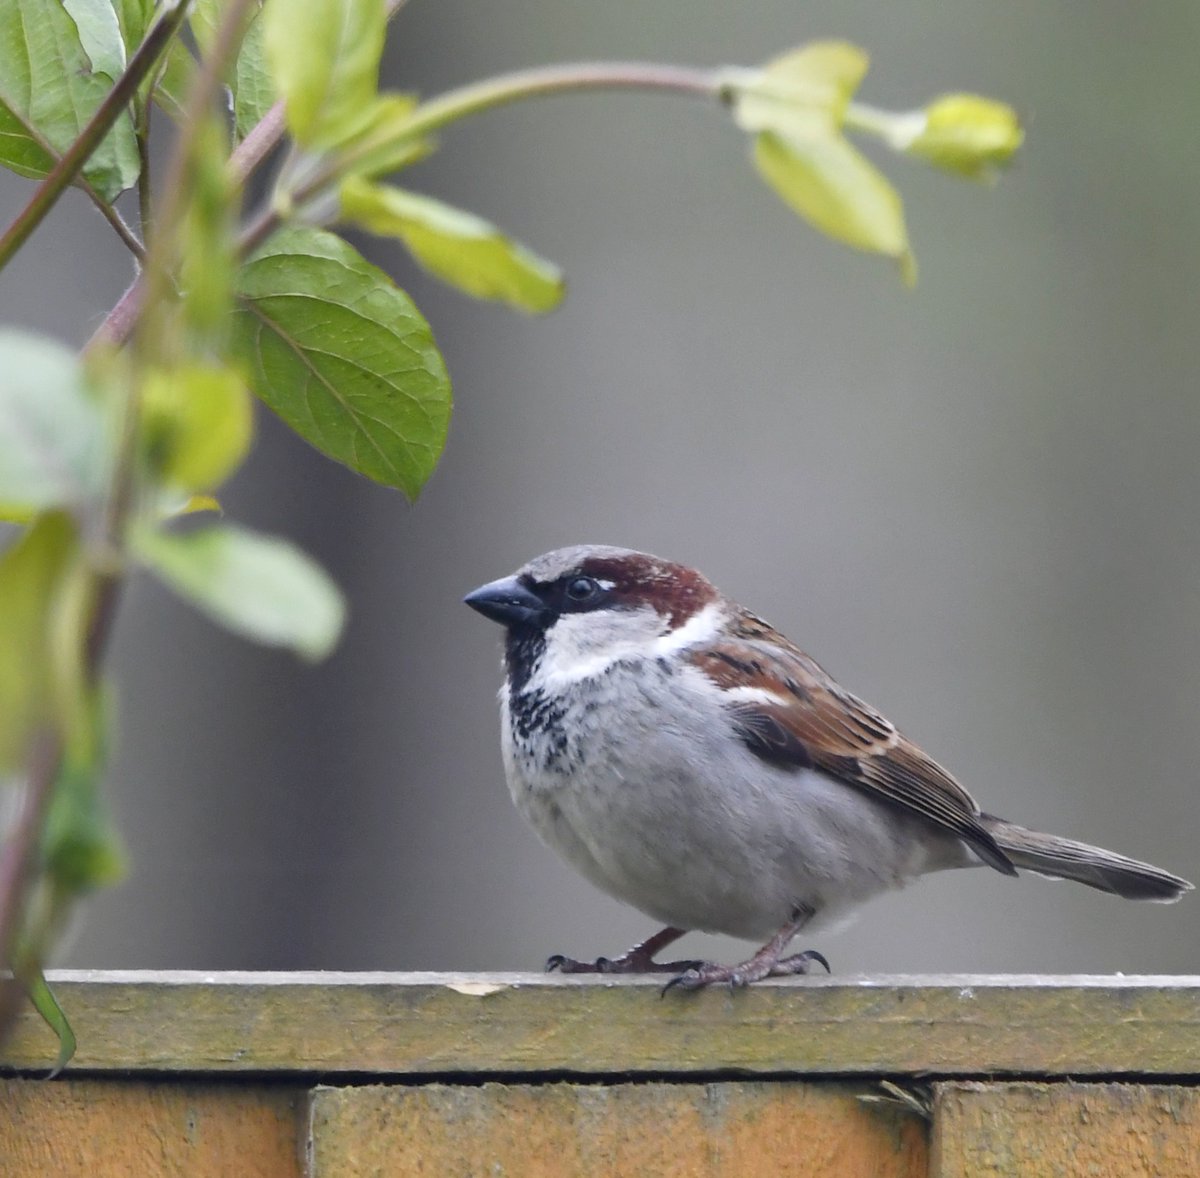 2. House Sparrow Much excitement when I saw this male House Sparrow, the first I had seen in my garden for months!Have you seen a House Sparrow during lockdown? #LockdownGardenBirdsSeen 